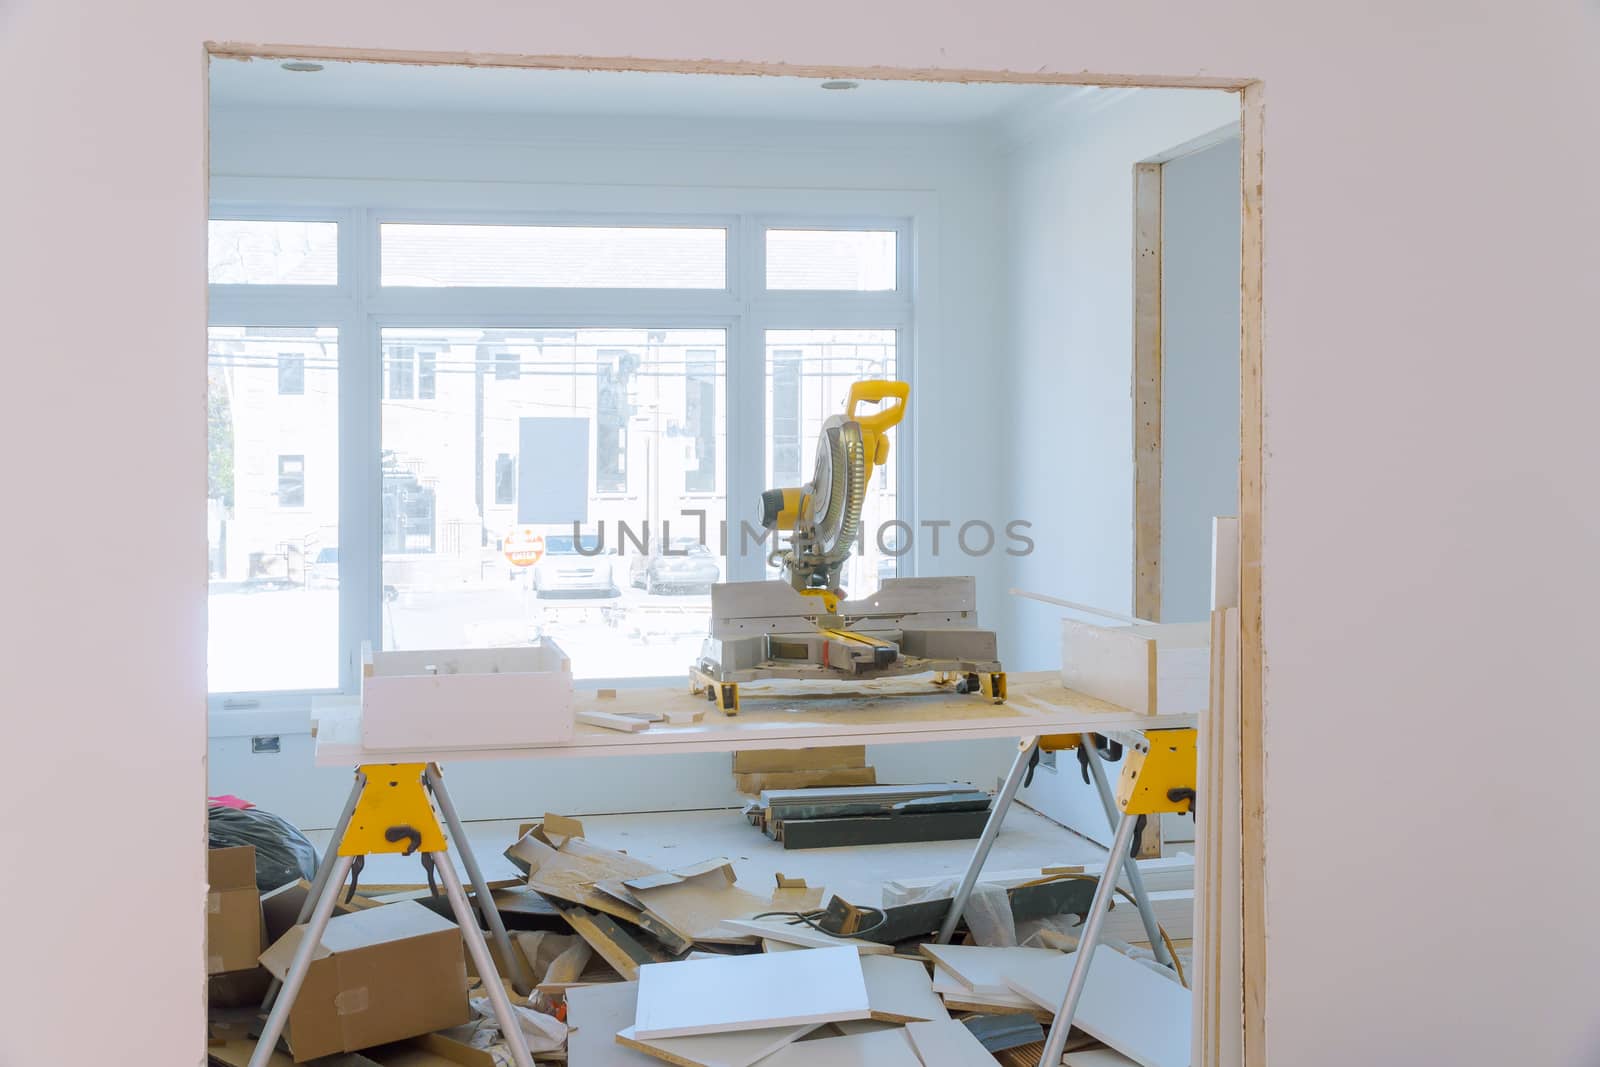 Construction remodeling home cutting wooden trim molding on with circular saw, saws a man